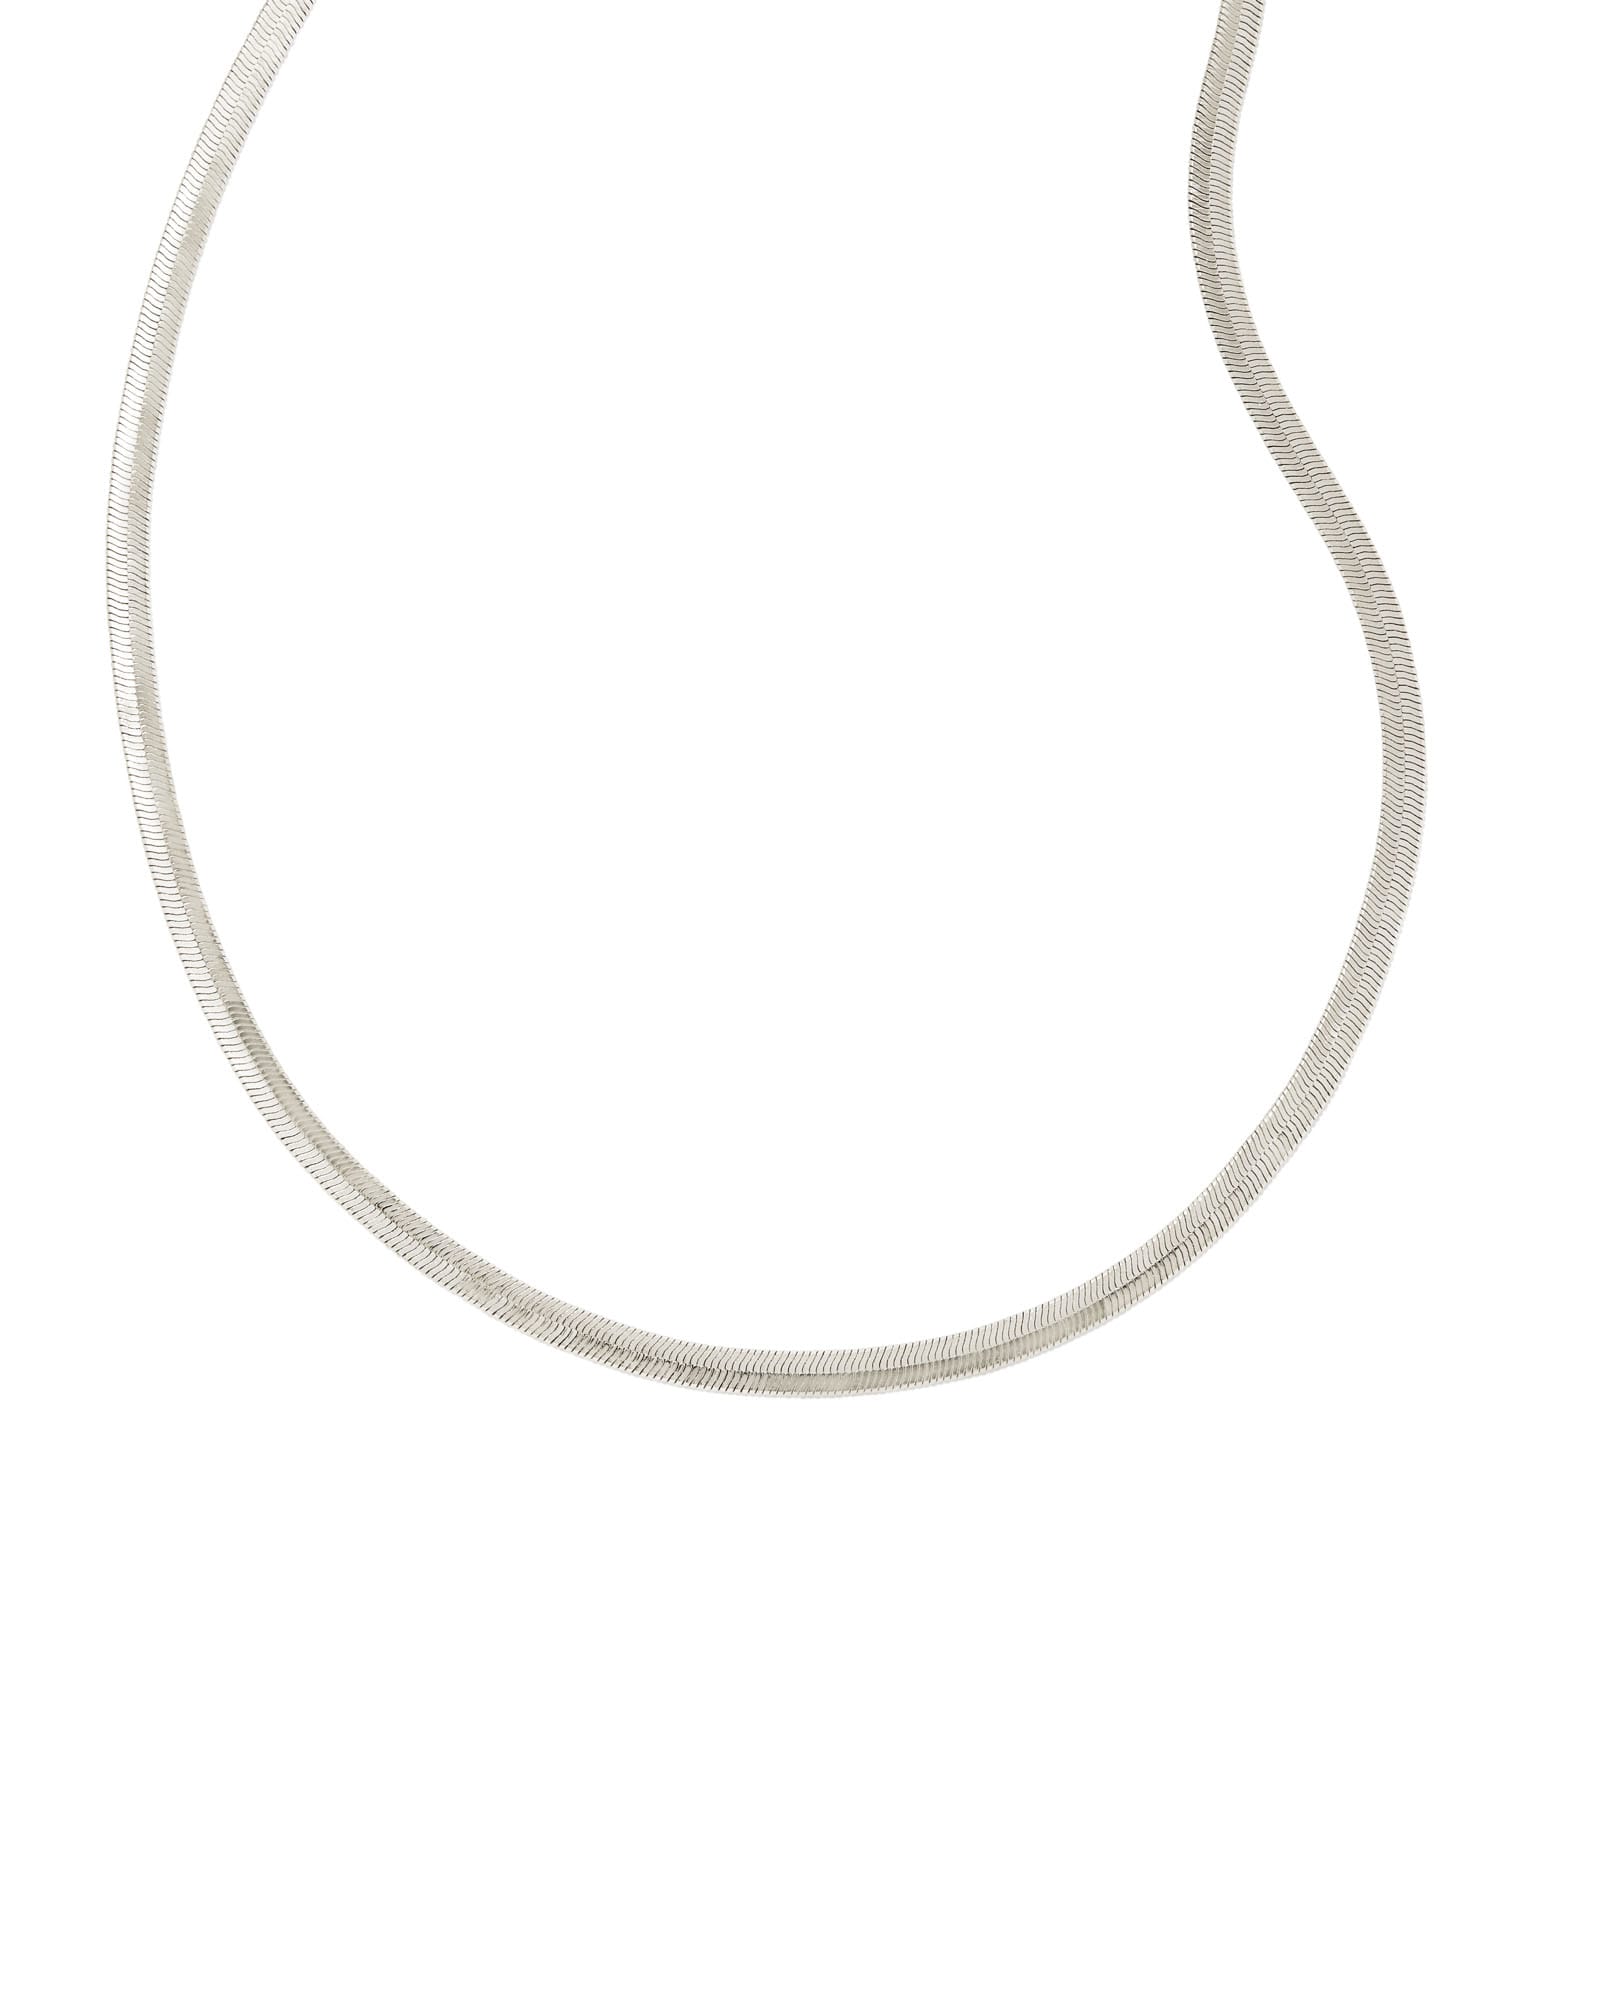 Photos - Pendant / Choker Necklace KENDRA SCOTT Kassie Reversible Chain Necklace in Mixed | Metal 